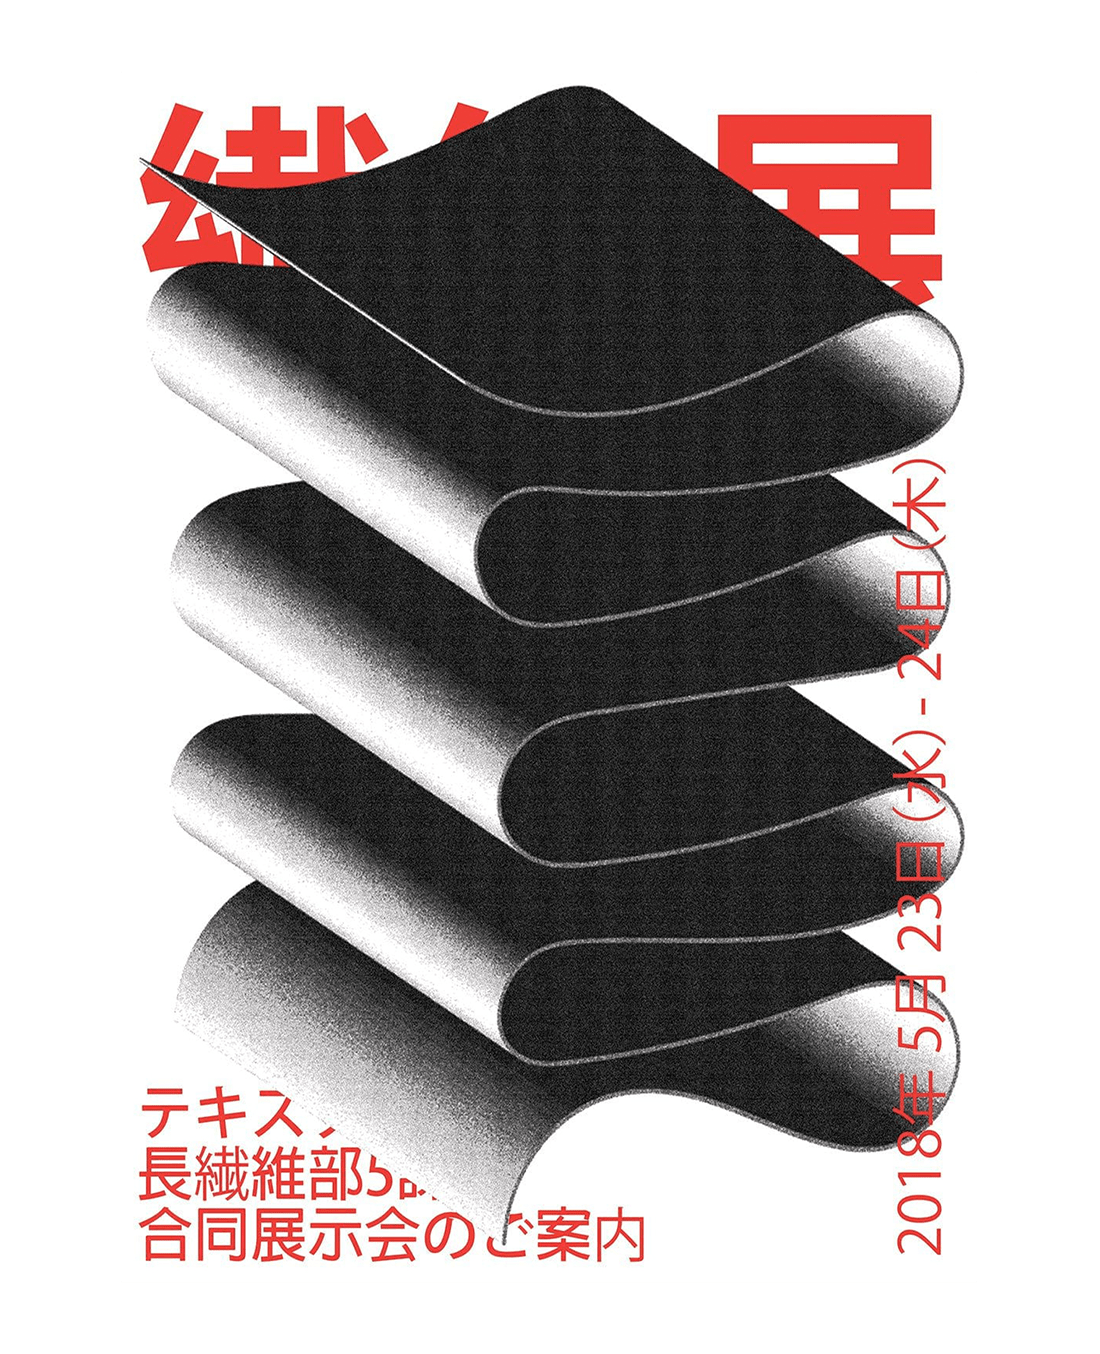 8.3x11.7" (A4) / Unframed Japan World contemporary wall art print by Maxim Dosca - sold by DROOL